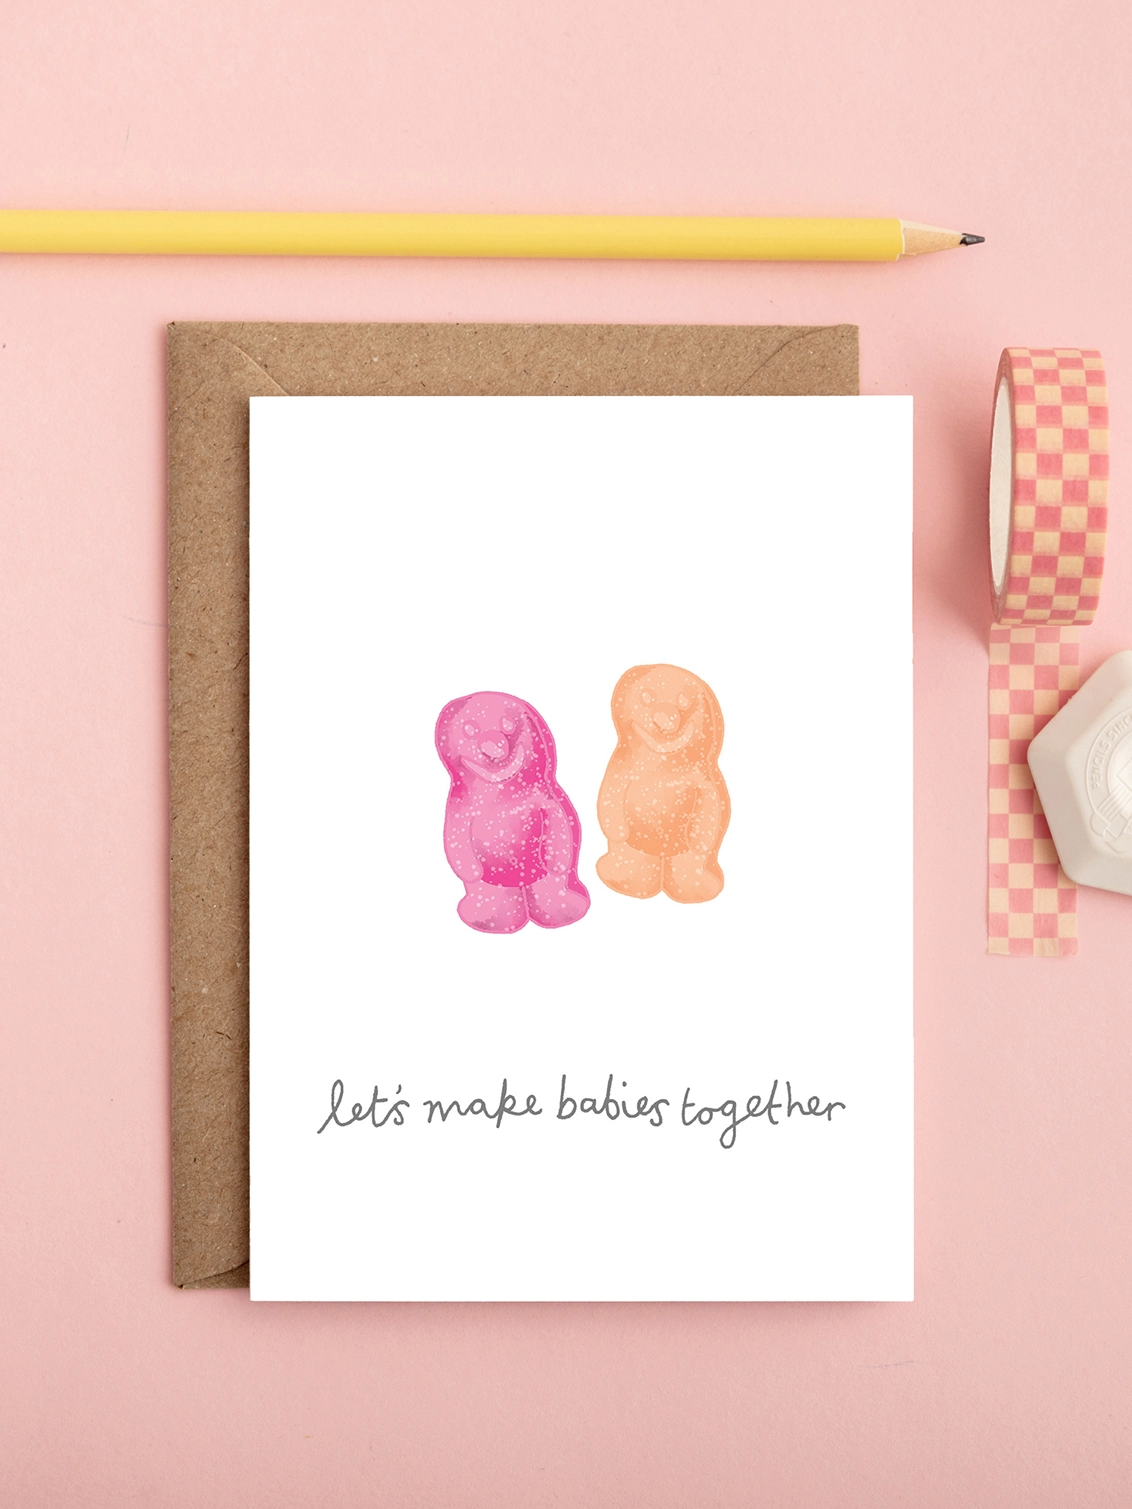 A funny love or valentines card featuring jelly babies